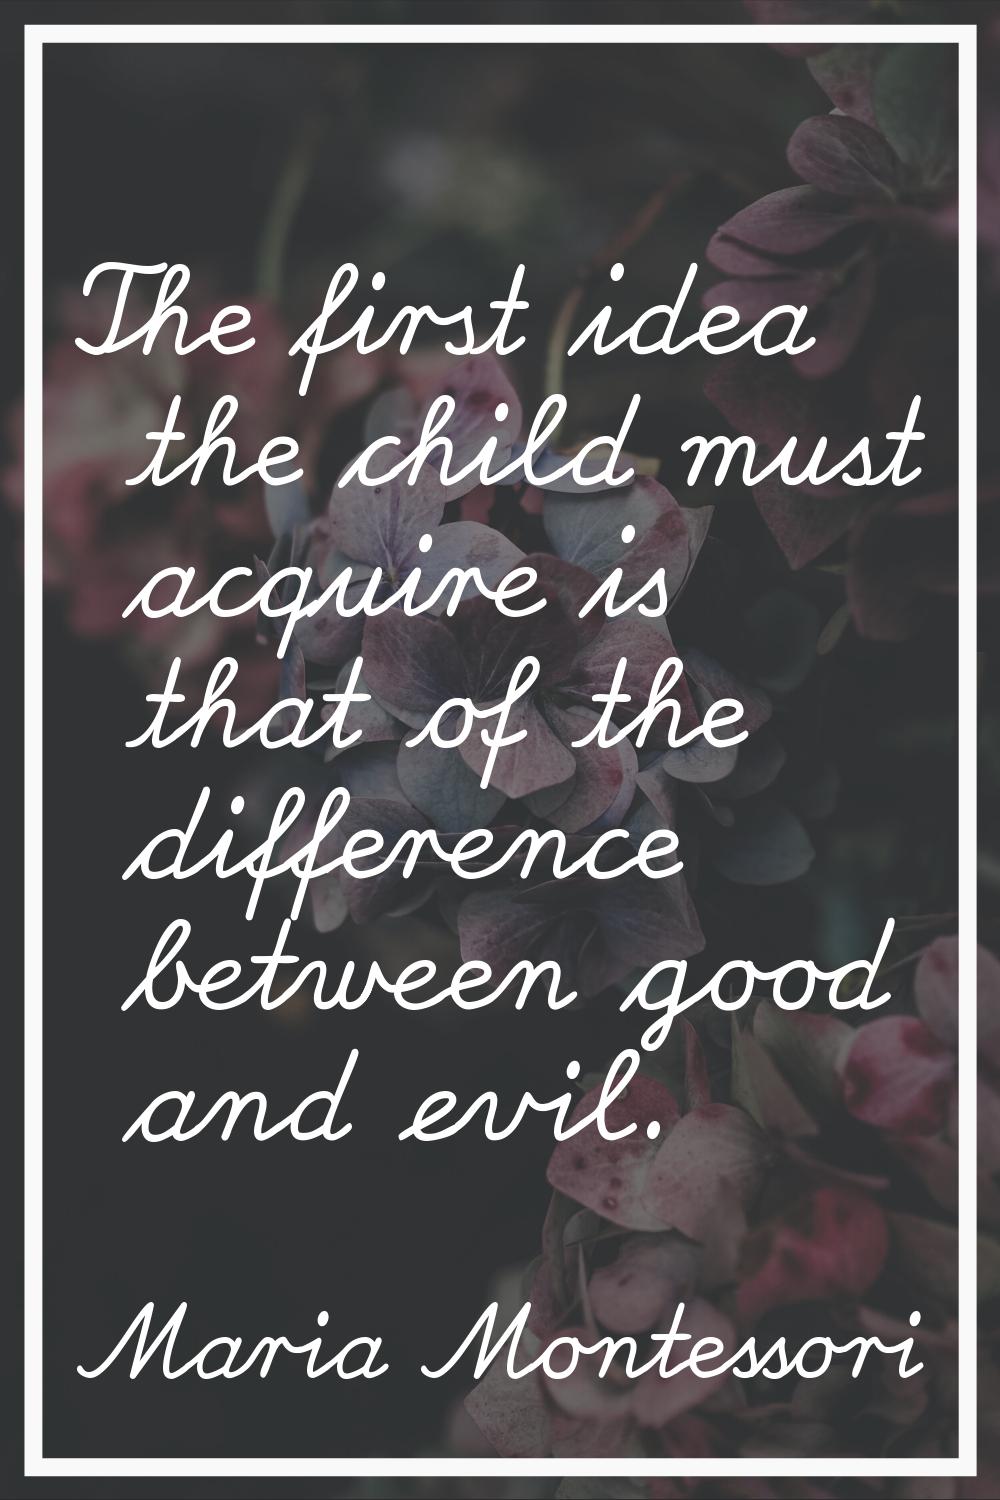 The first idea the child must acquire is that of the difference between good and evil.